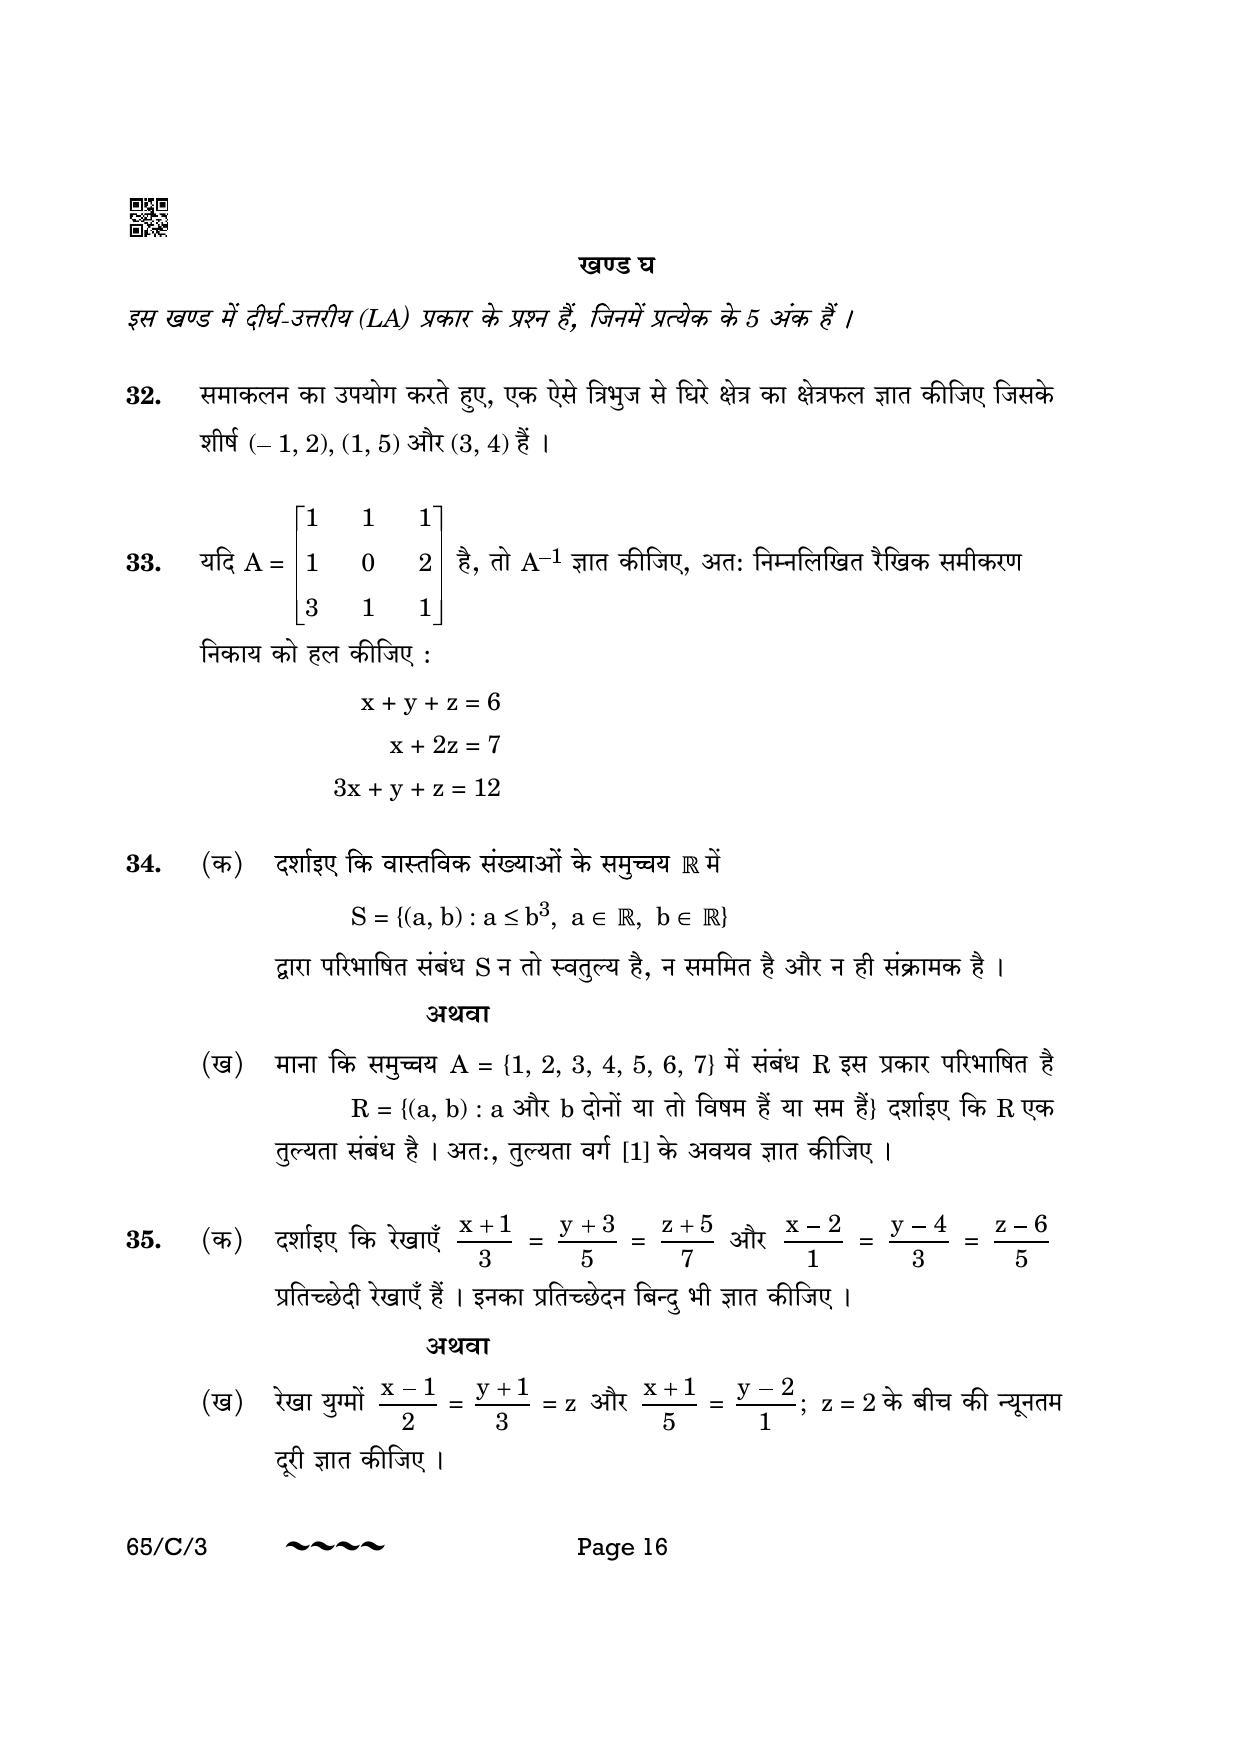 CBSE Class 12 65-3- Mathematics 2023 (Compartment) Question Paper - Page 16